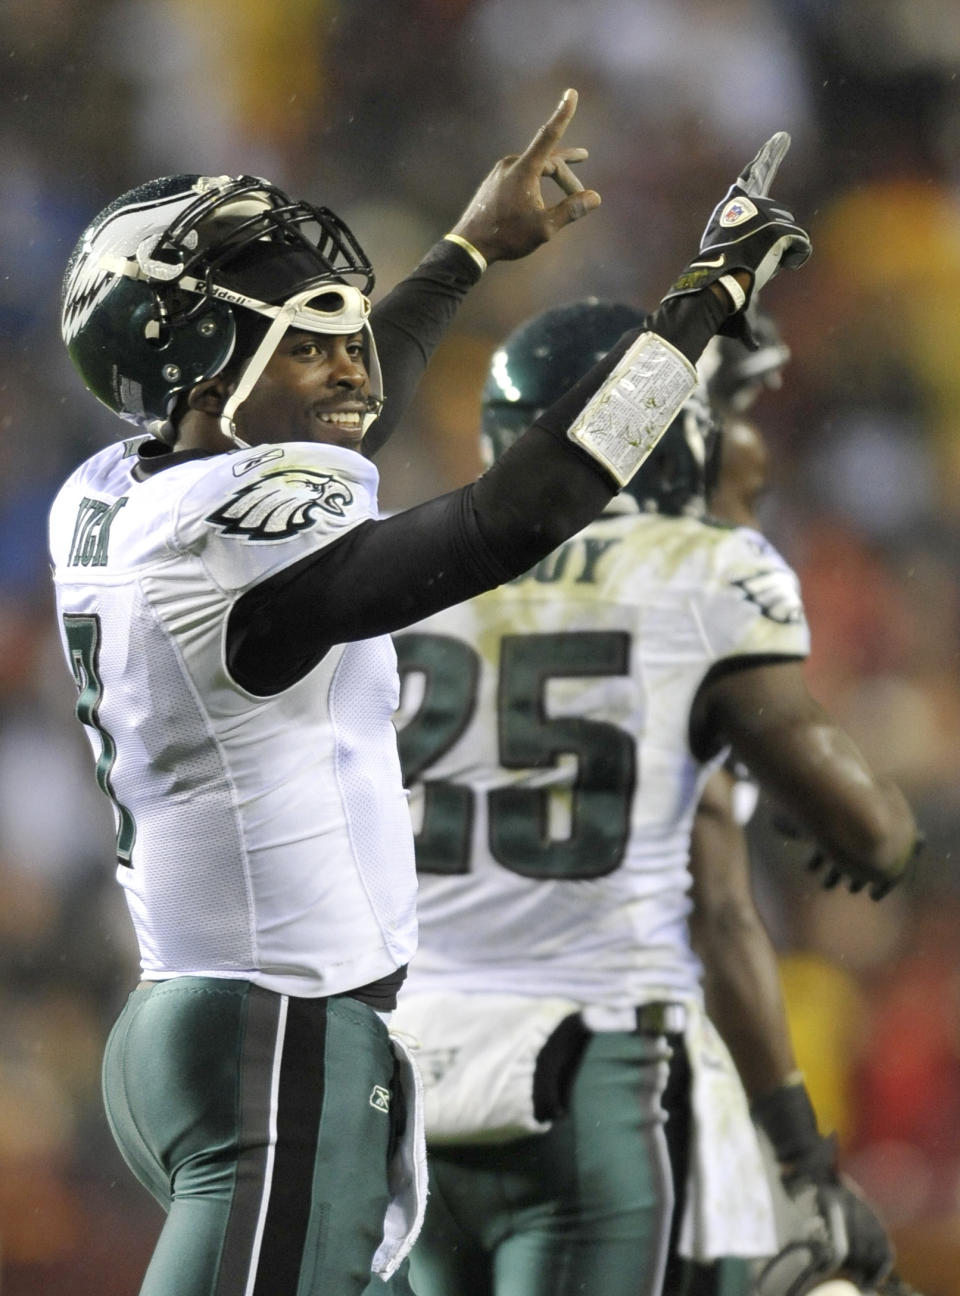 FILE - In a Nov. 15, 2010 file photo, Philadelphia Eagles quarterback Michael Vick celebrates after throwing a touchdown pass to wide receiver Jeremy Macli during the first half of an NFL football game against the Washington Redskins, in Landover, Md. The New York Jets signed quarterback Michael Vick and released Mark Sanchez on Friday, March 21, 2014. Vick was a free agent after spending the last five seasons with the Phialdelphia Eagles. (AP Photo/Gail Burton, File)